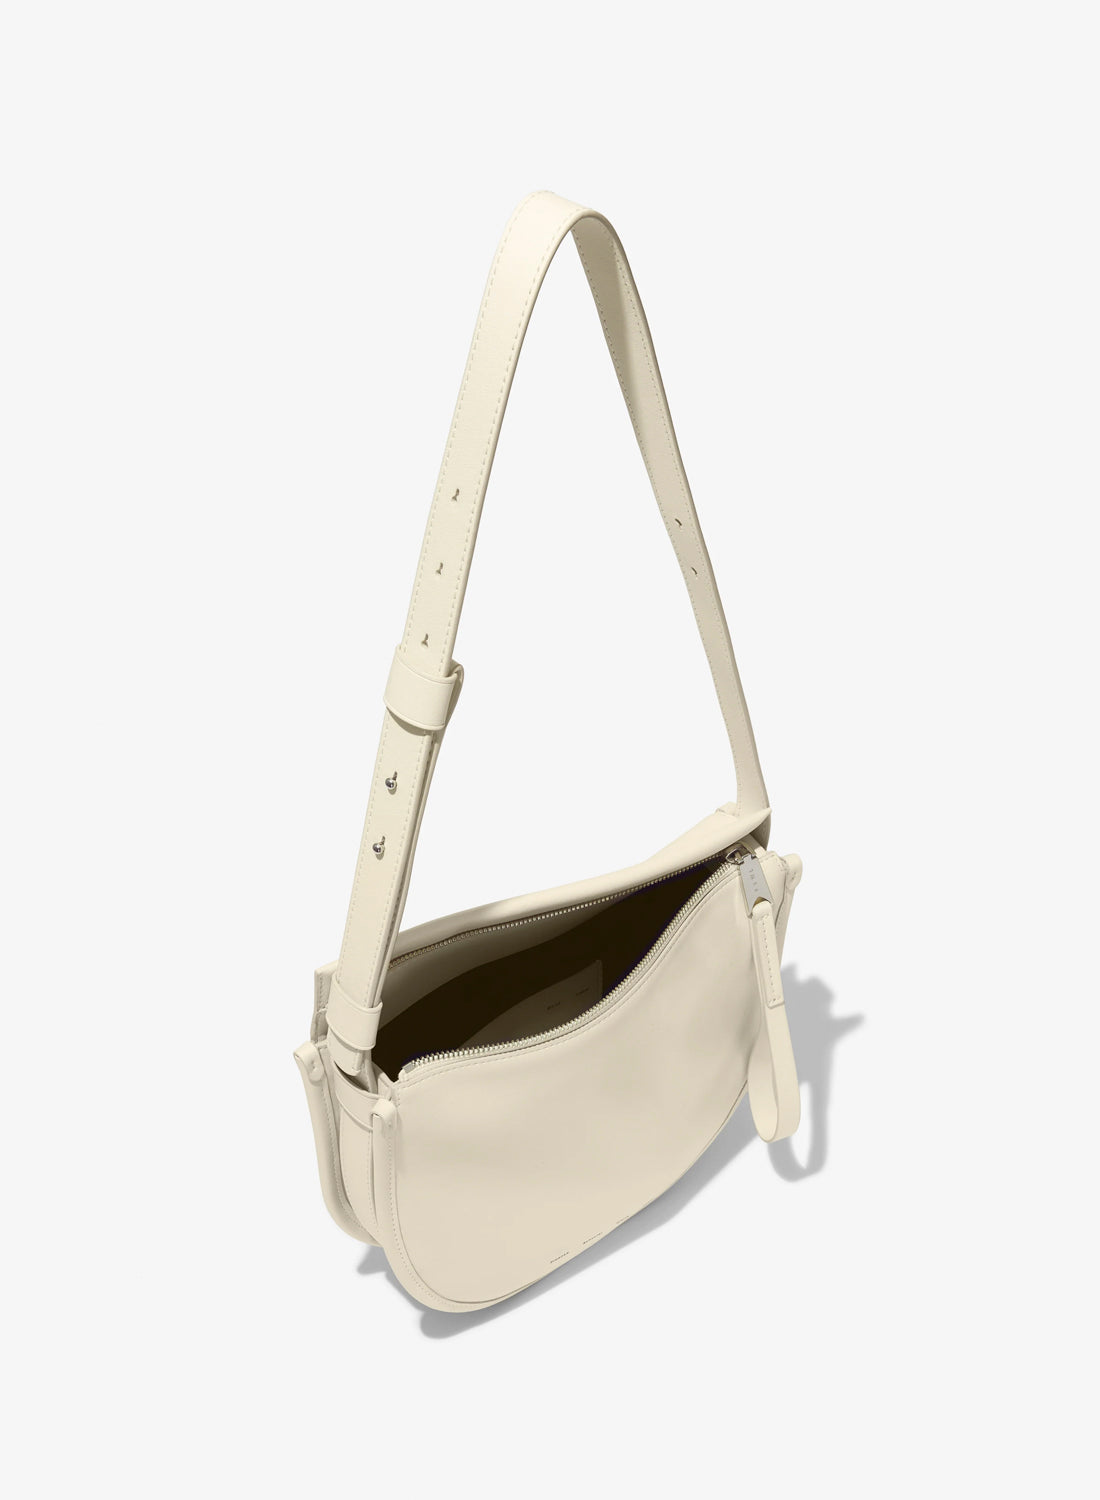 Proenza Schouler White Label Medium Baxter Bag In Leather Ivory